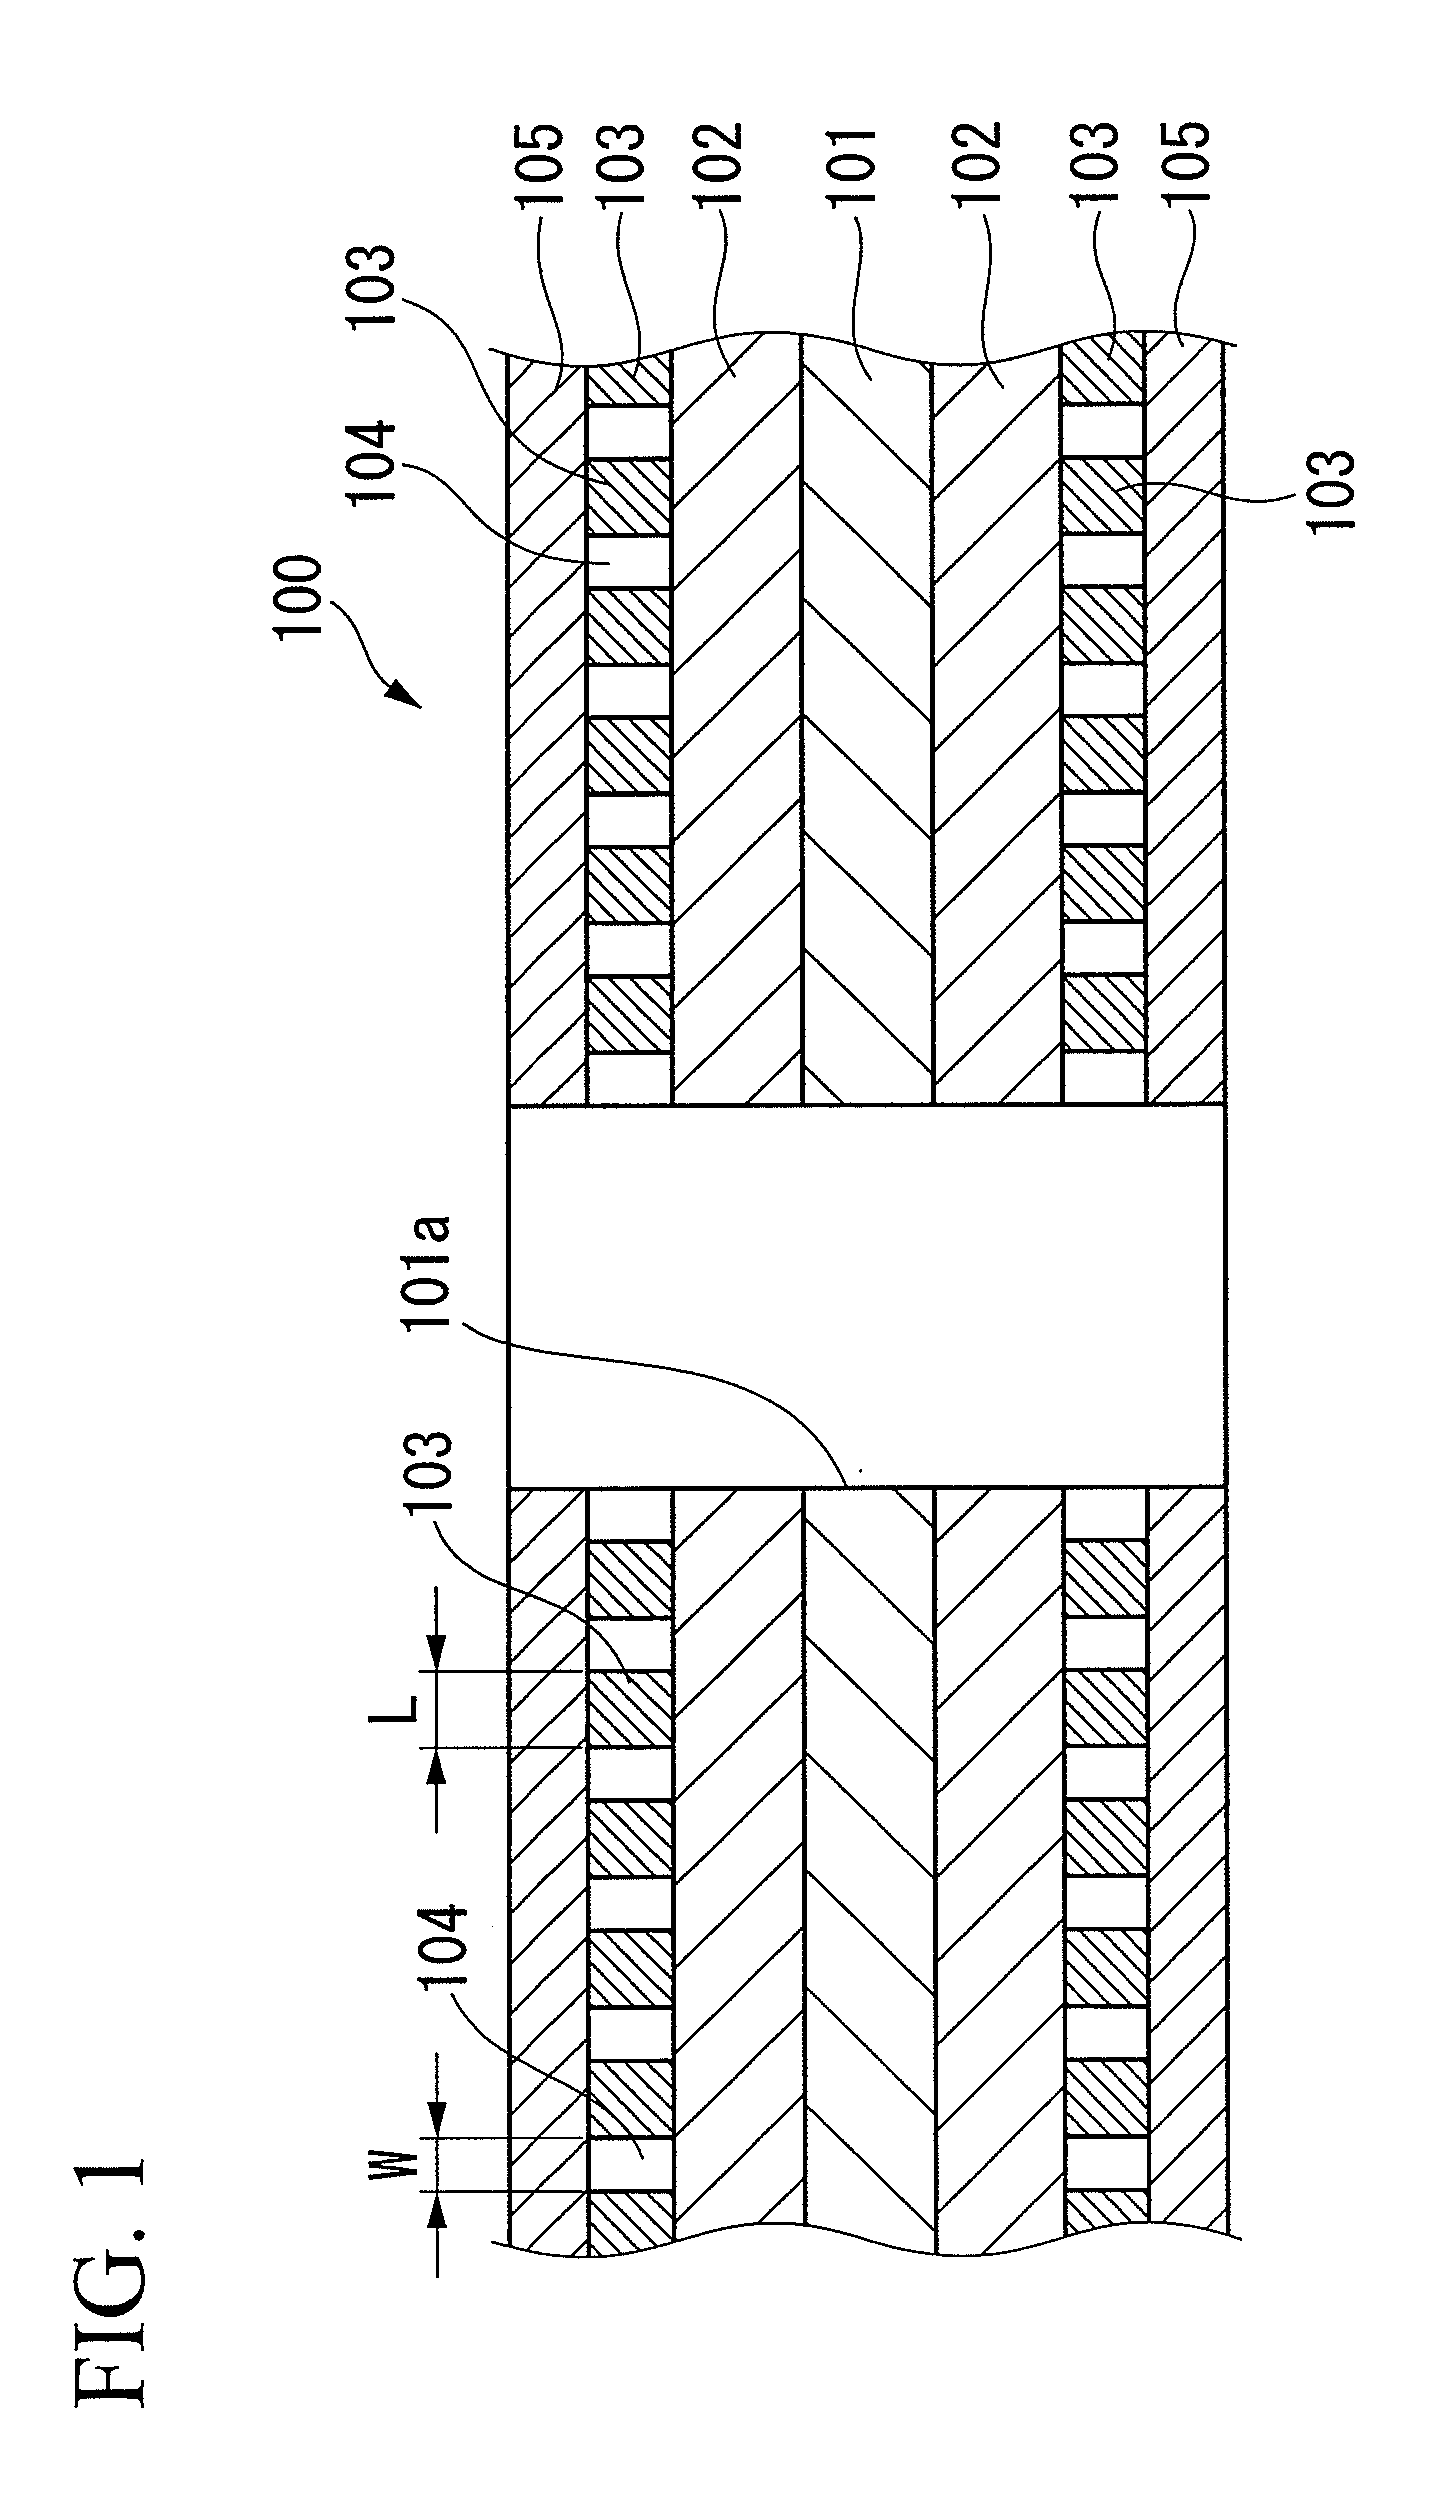 Double-side coating apparatus, method for coating double sides with coating solution,  edge rinsing apparatus, and  edge  rinsing method